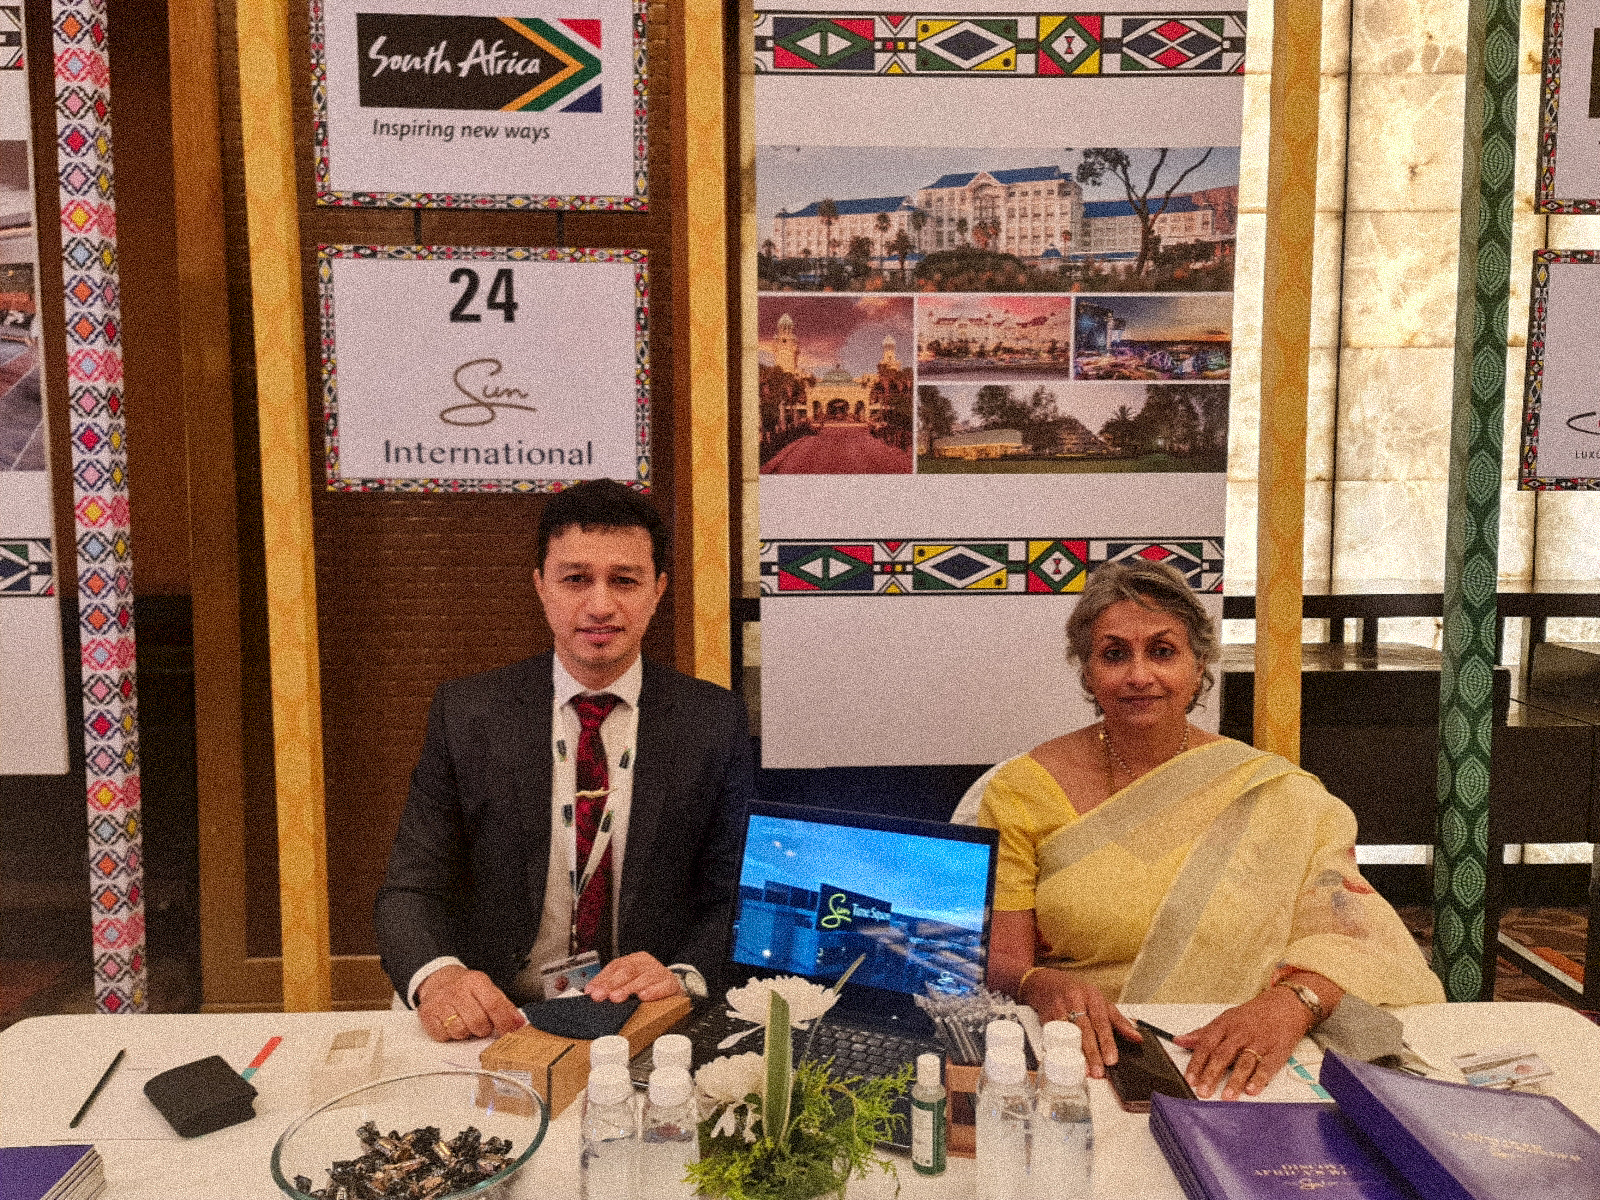 Sun International from South Africa, participated in the roadshows with South Africa Tourism Board